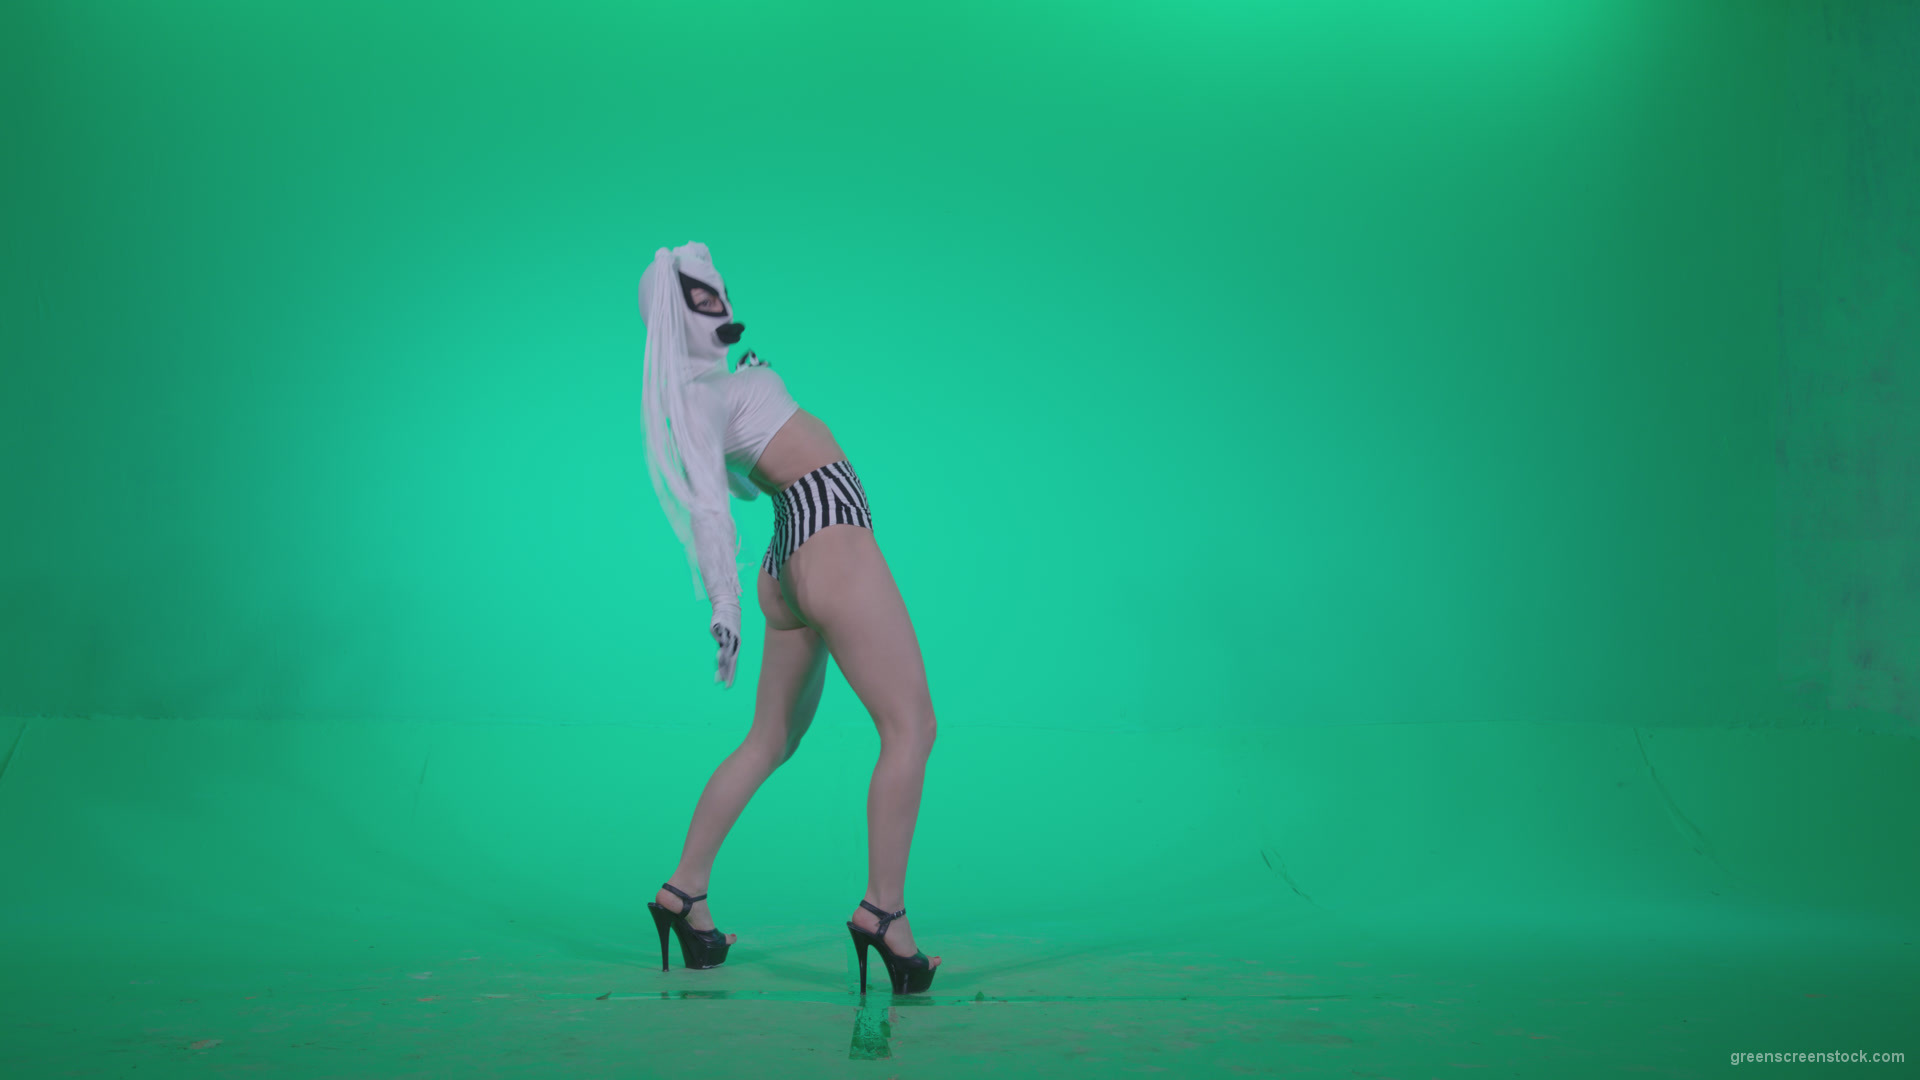 Go Go Dancer With Latex Top T5 Green Screen Video Footage Video